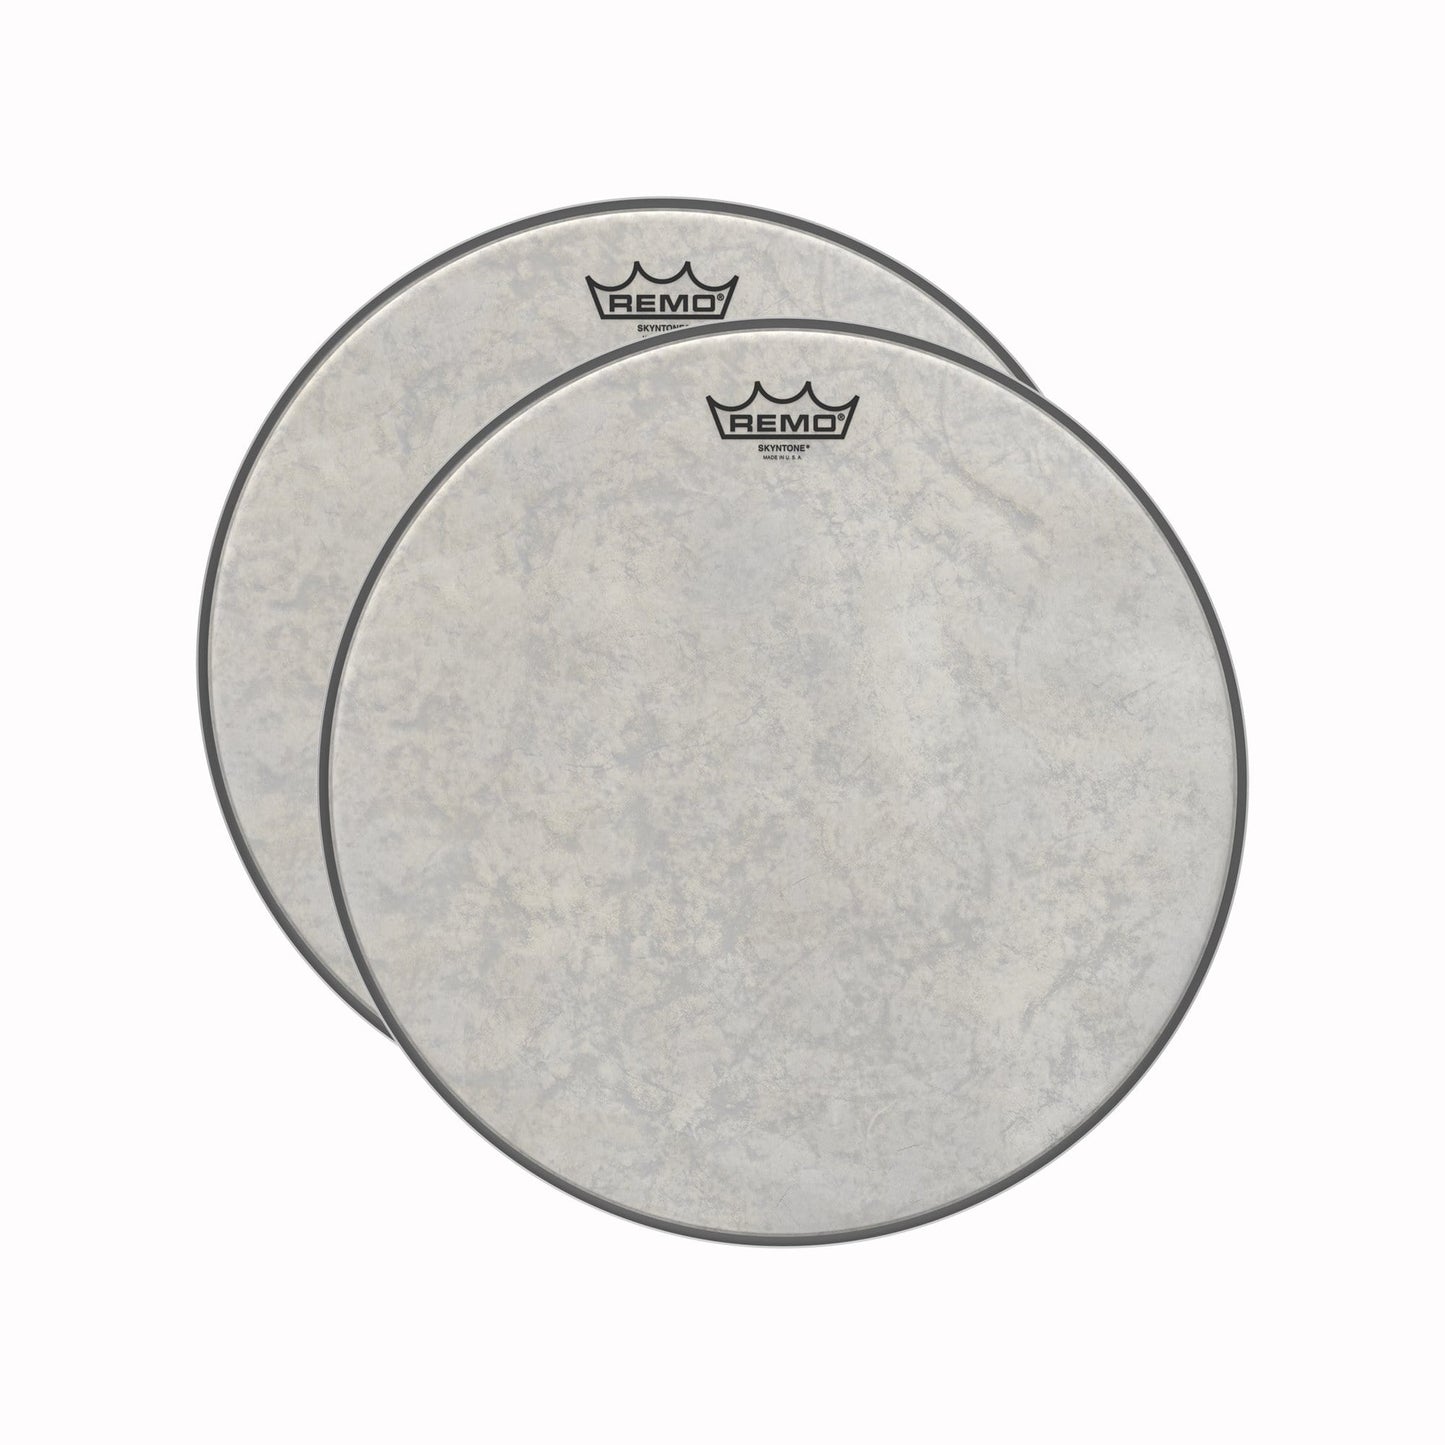 Remo 15" Diplomat Skyntone Drumhead (2 Pack Bundle) Drums and Percussion / Parts and Accessories / Heads